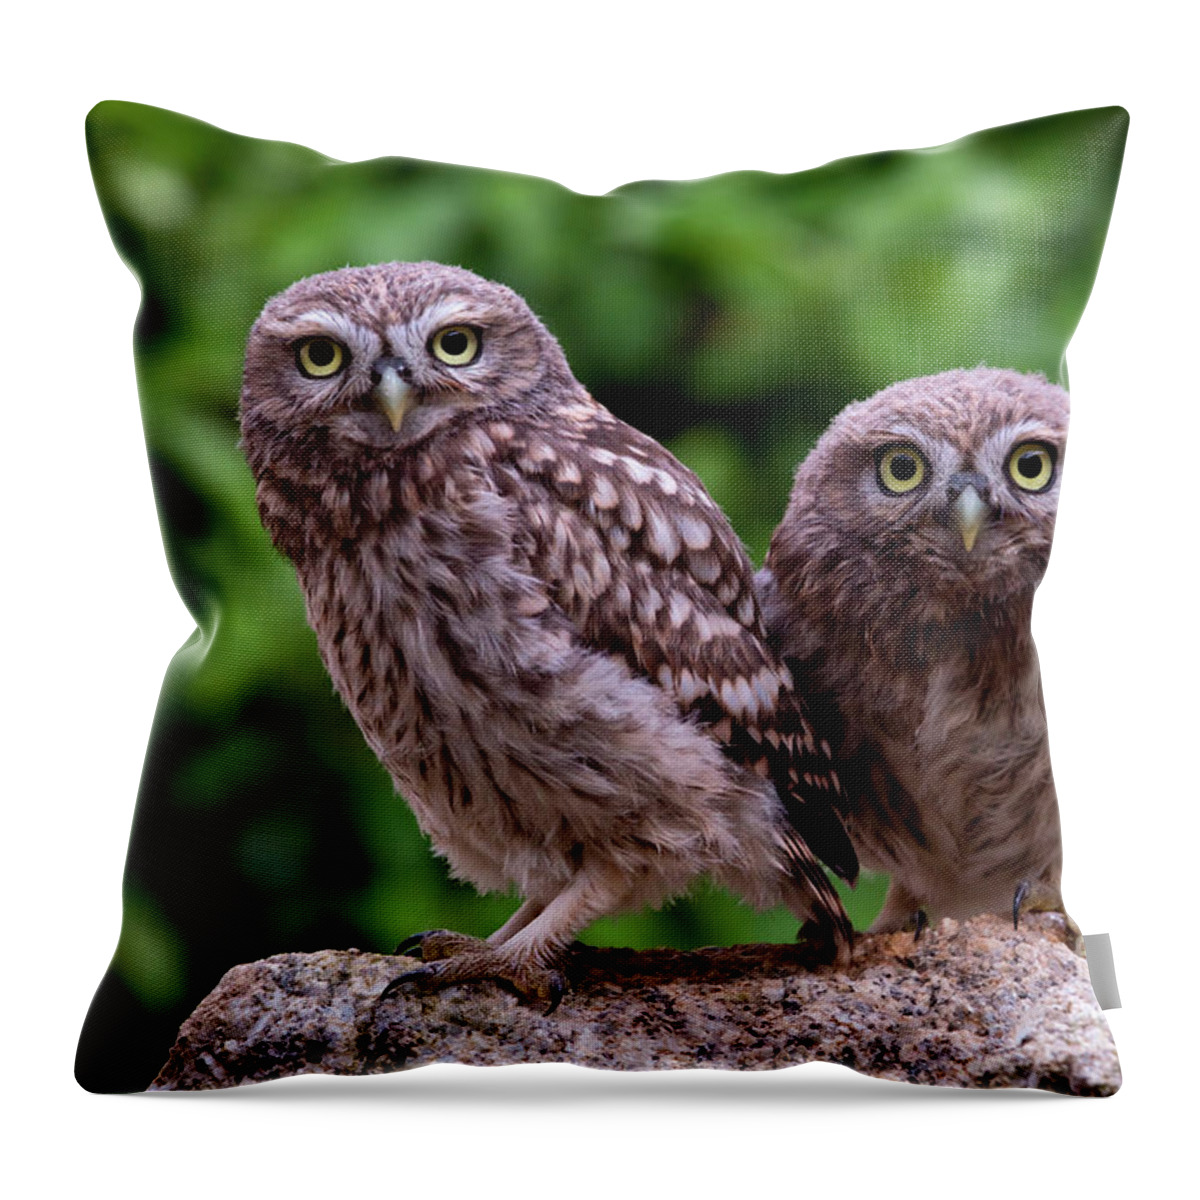 00527885 Throw Pillow featuring the photograph Two Little Owls by Marion Vollborn